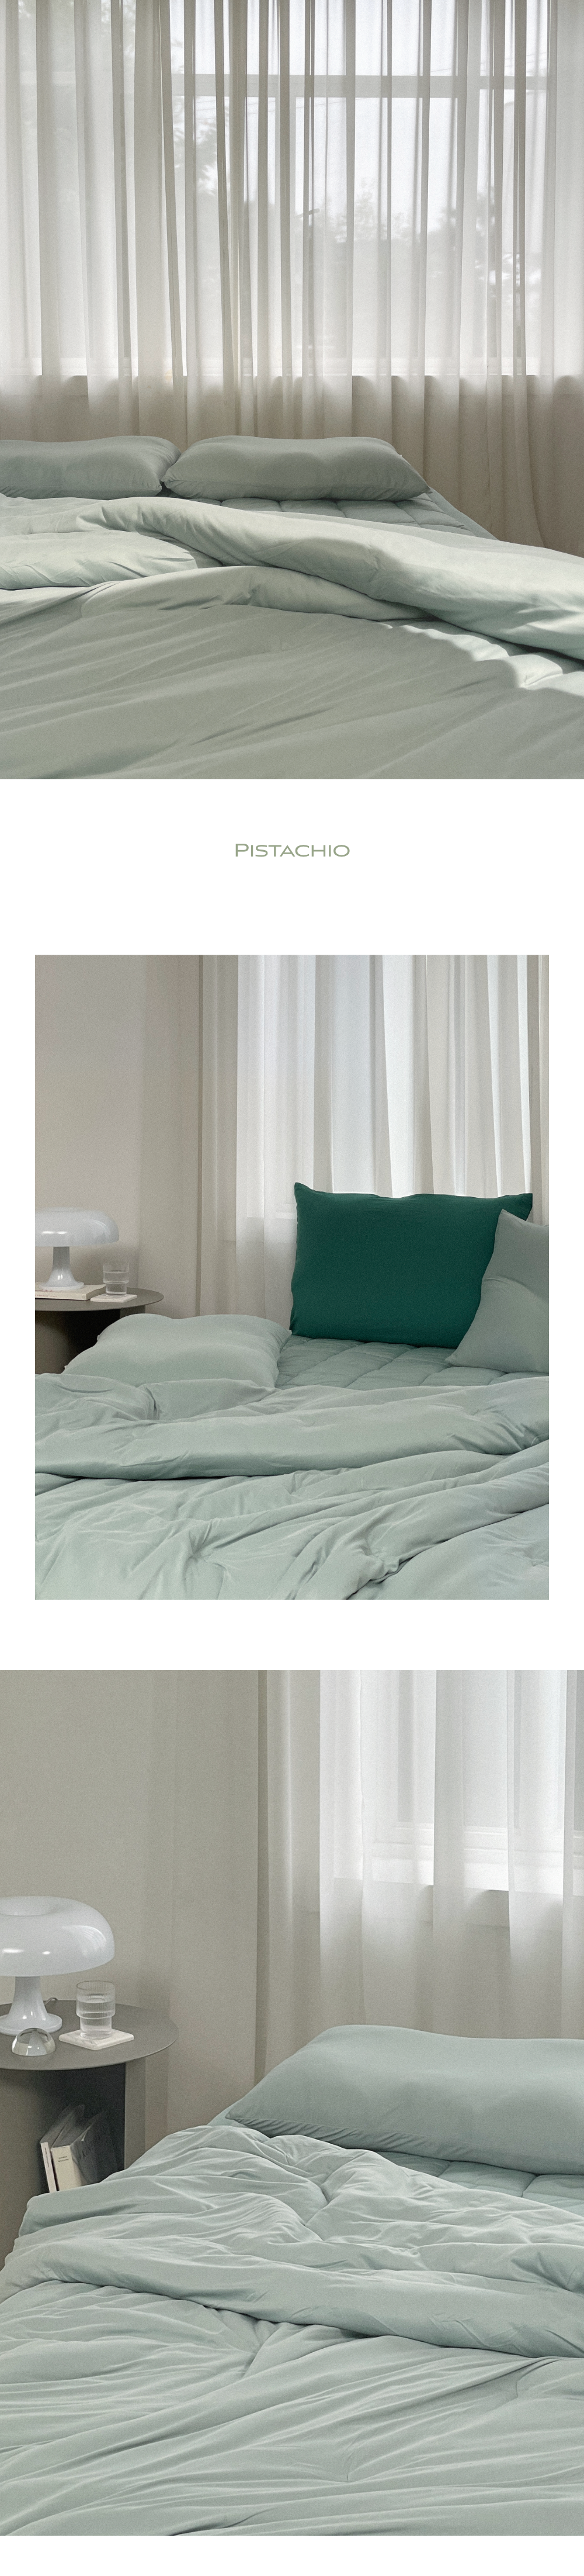 Bodyluv Po-ong blanket- po-ong bedding-Particularly soft and pleasant to the touch,  it's a perfect blanket for snuggle -dream bedding-snuggle blanket-Soft Quilt-Lightweight Washable Quilt-the best soft mattress toppers